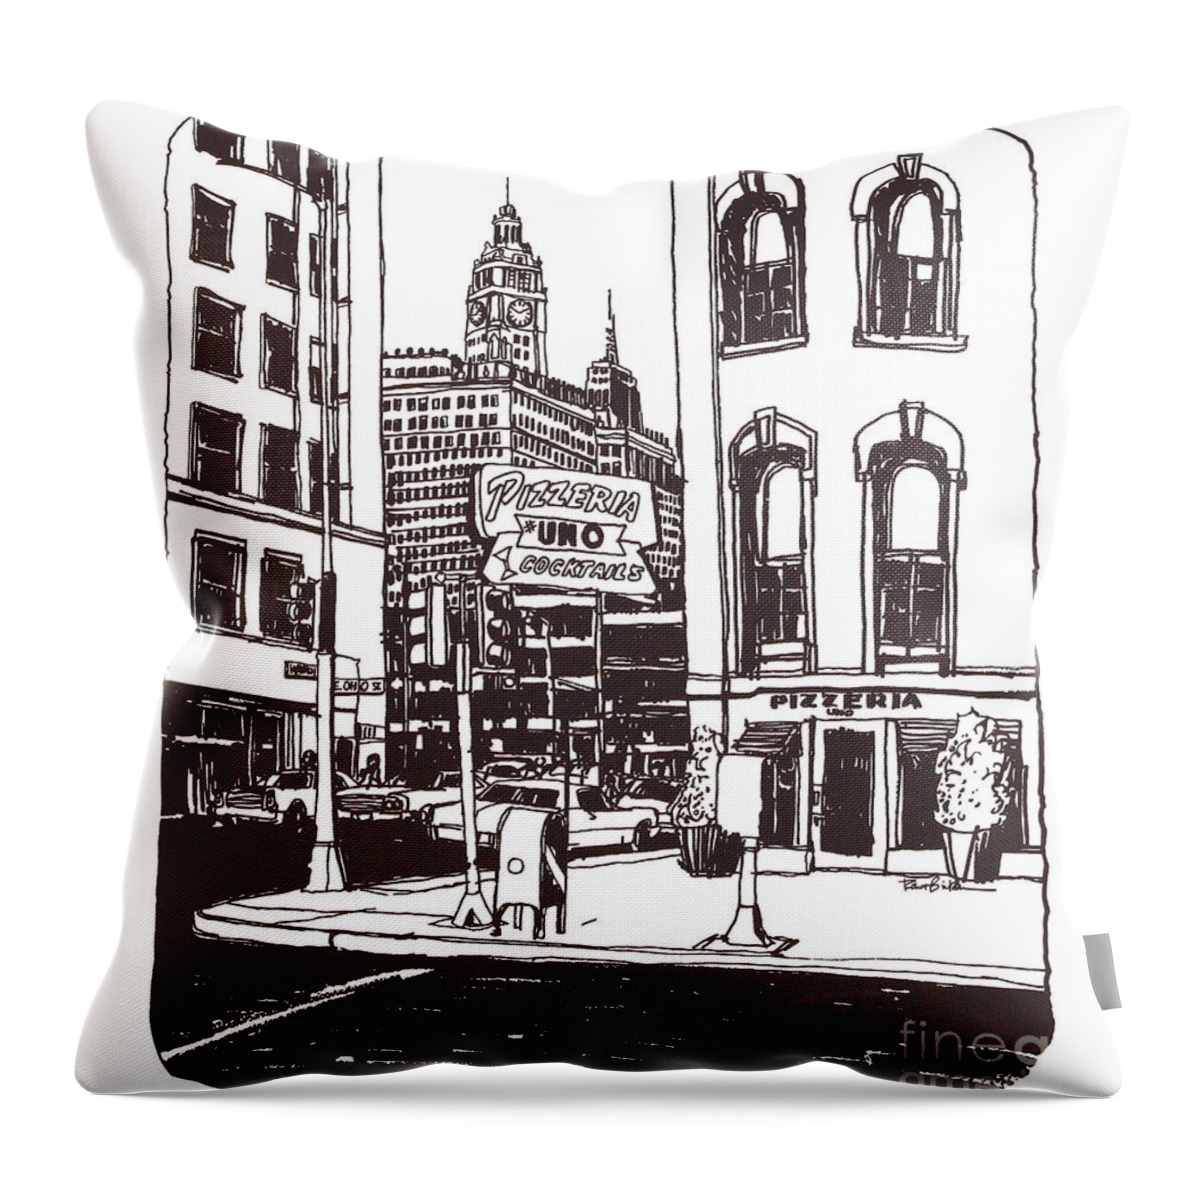 Chicago - Pizzeria Uno Original Restaurant With The Wrigley Bldg In The Background. Located At Wabash And Ohio Streets. I Hand Printed This Myself In The Early 1970's. Throw Pillow featuring the drawing Chicago Pizzeria Uno Restaurant by Robert Birkenes